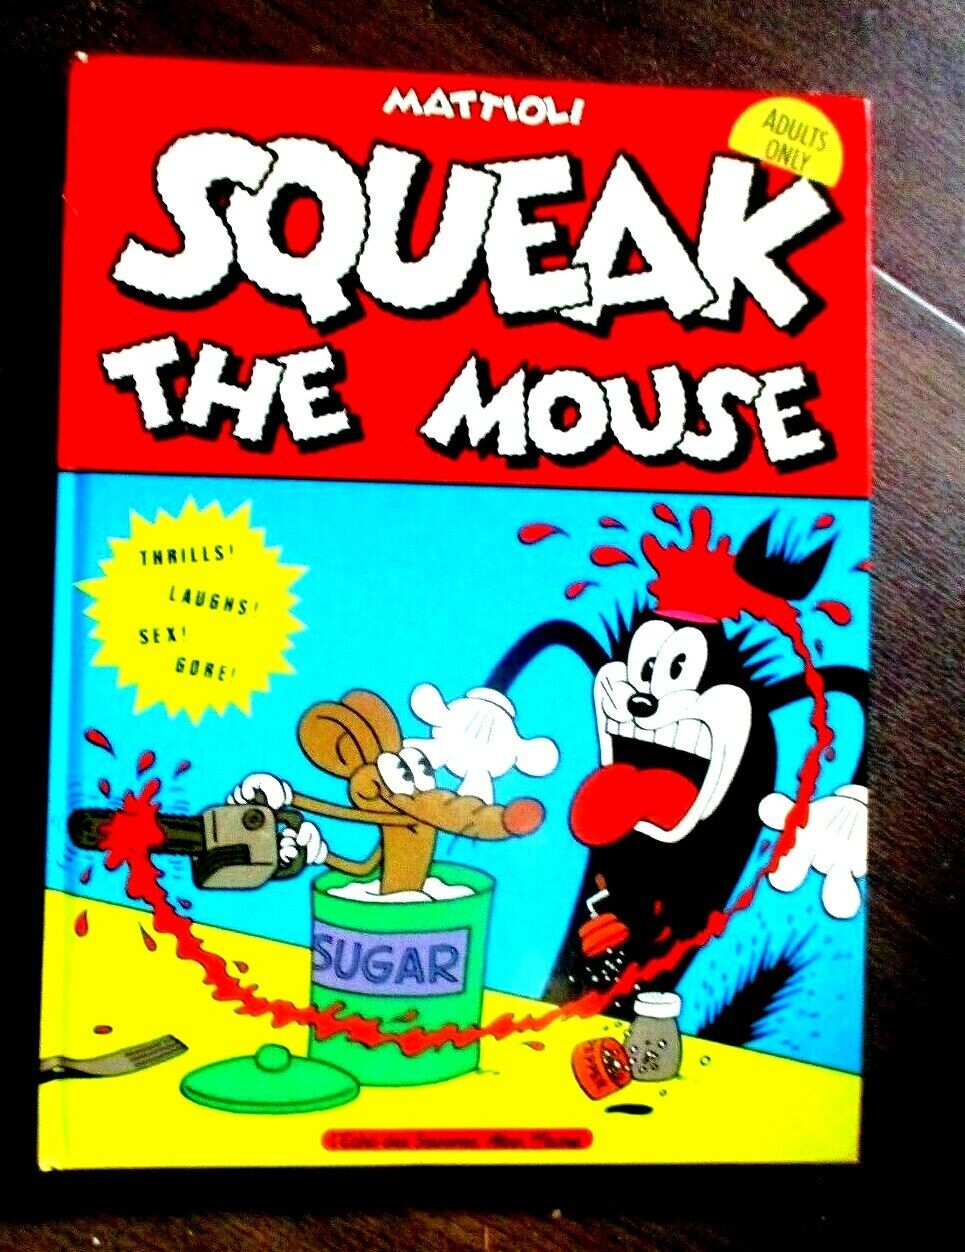 SQUEAK THE MOUSE HARDCOVER SEIZED BY CUSTOMS FOR OBSCENITY